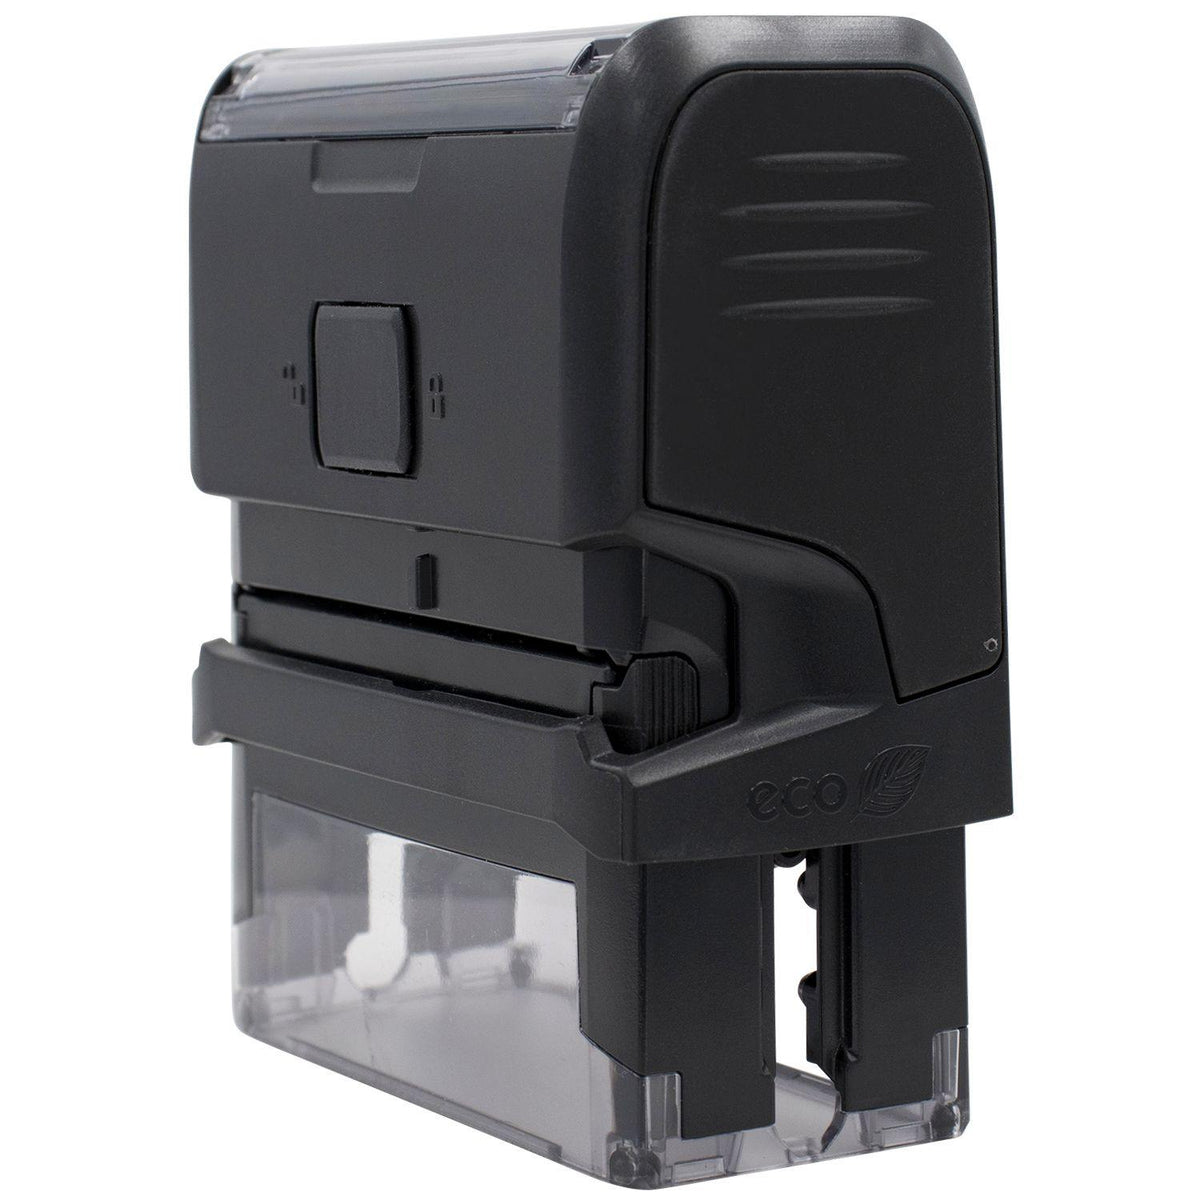 Self-Inking Tripilicado Stamp - Engineer Seal Stamps - Brand_Trodat, Impression Size_Small, Stamp Type_Self-Inking Stamp, Type of Use_General, Type of Use_Office